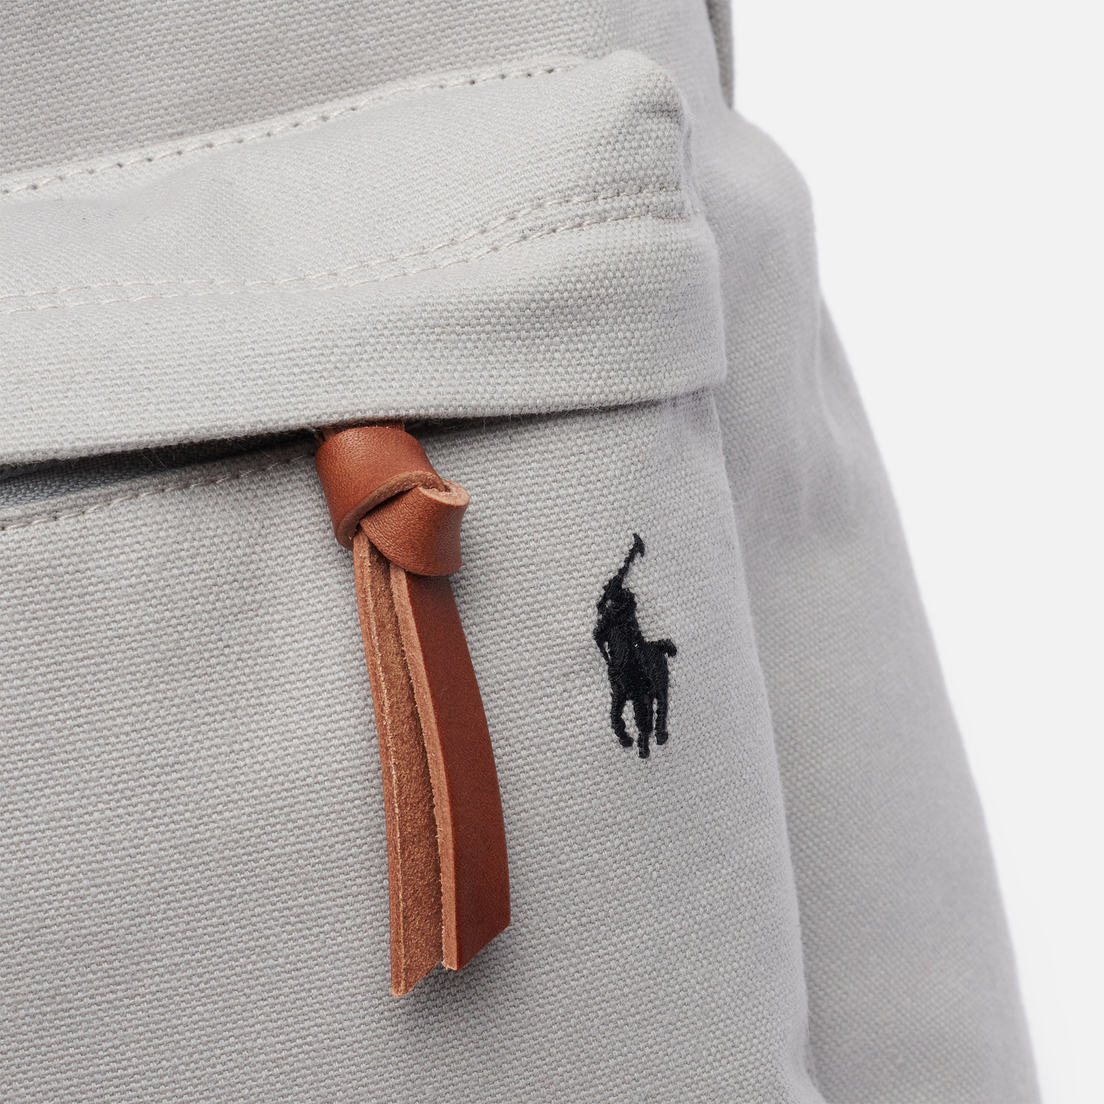 Polo Ralph Lauren Рюкзак Canvas Large Embroidered Logo